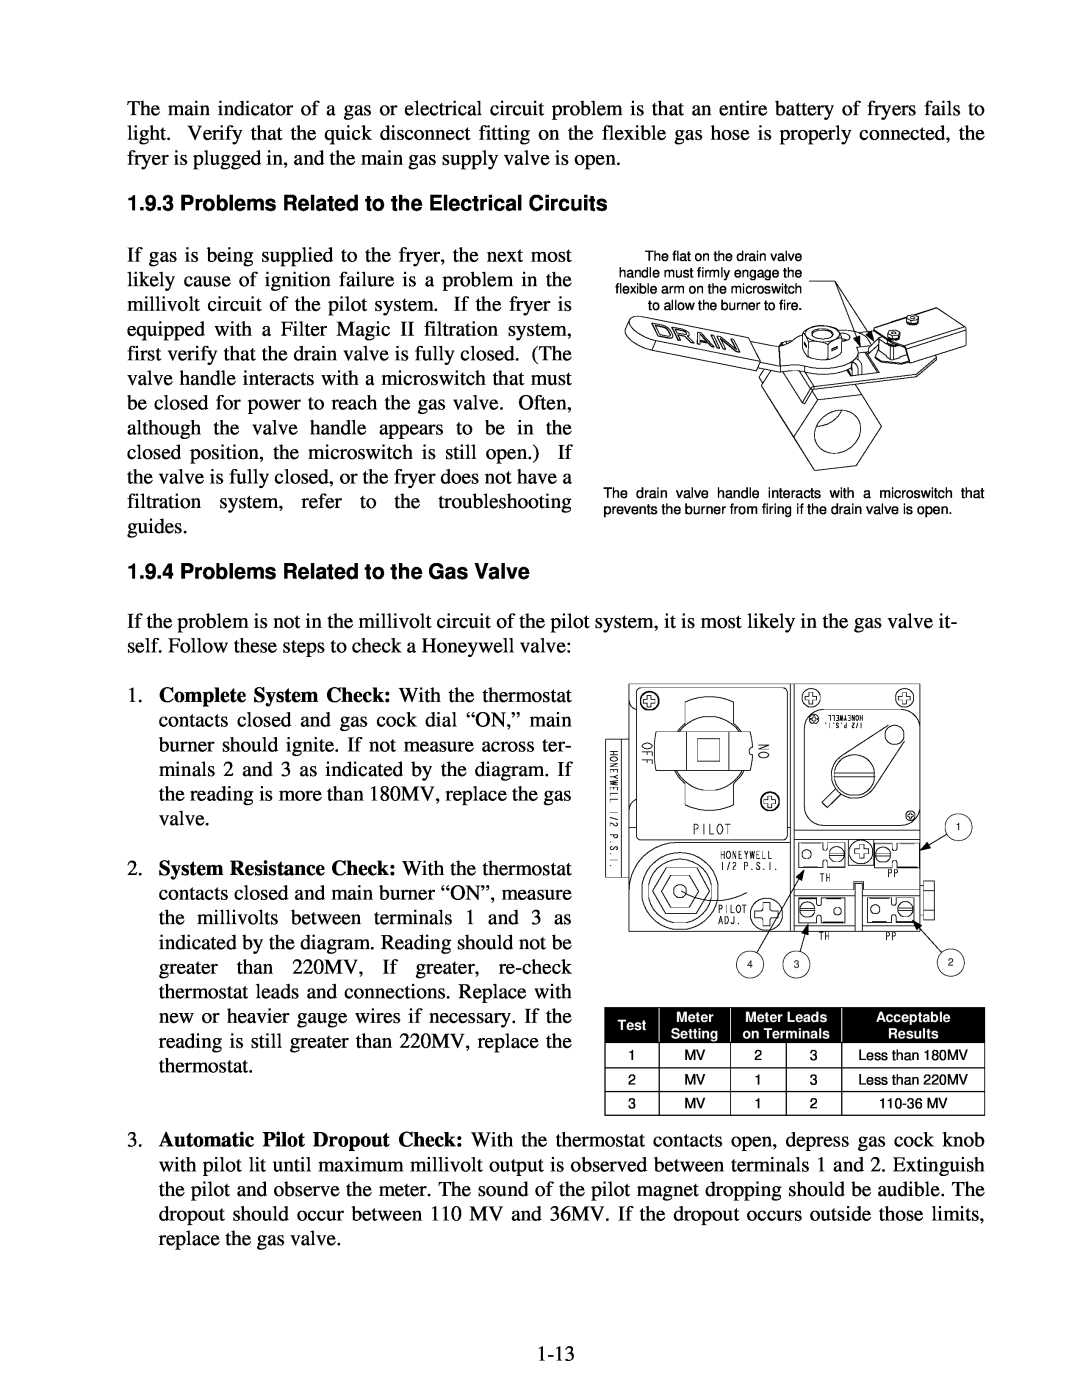 Frymaster 35 Series manual Problems Related to the Electrical Circuits, Problems Related to the Gas Valve 